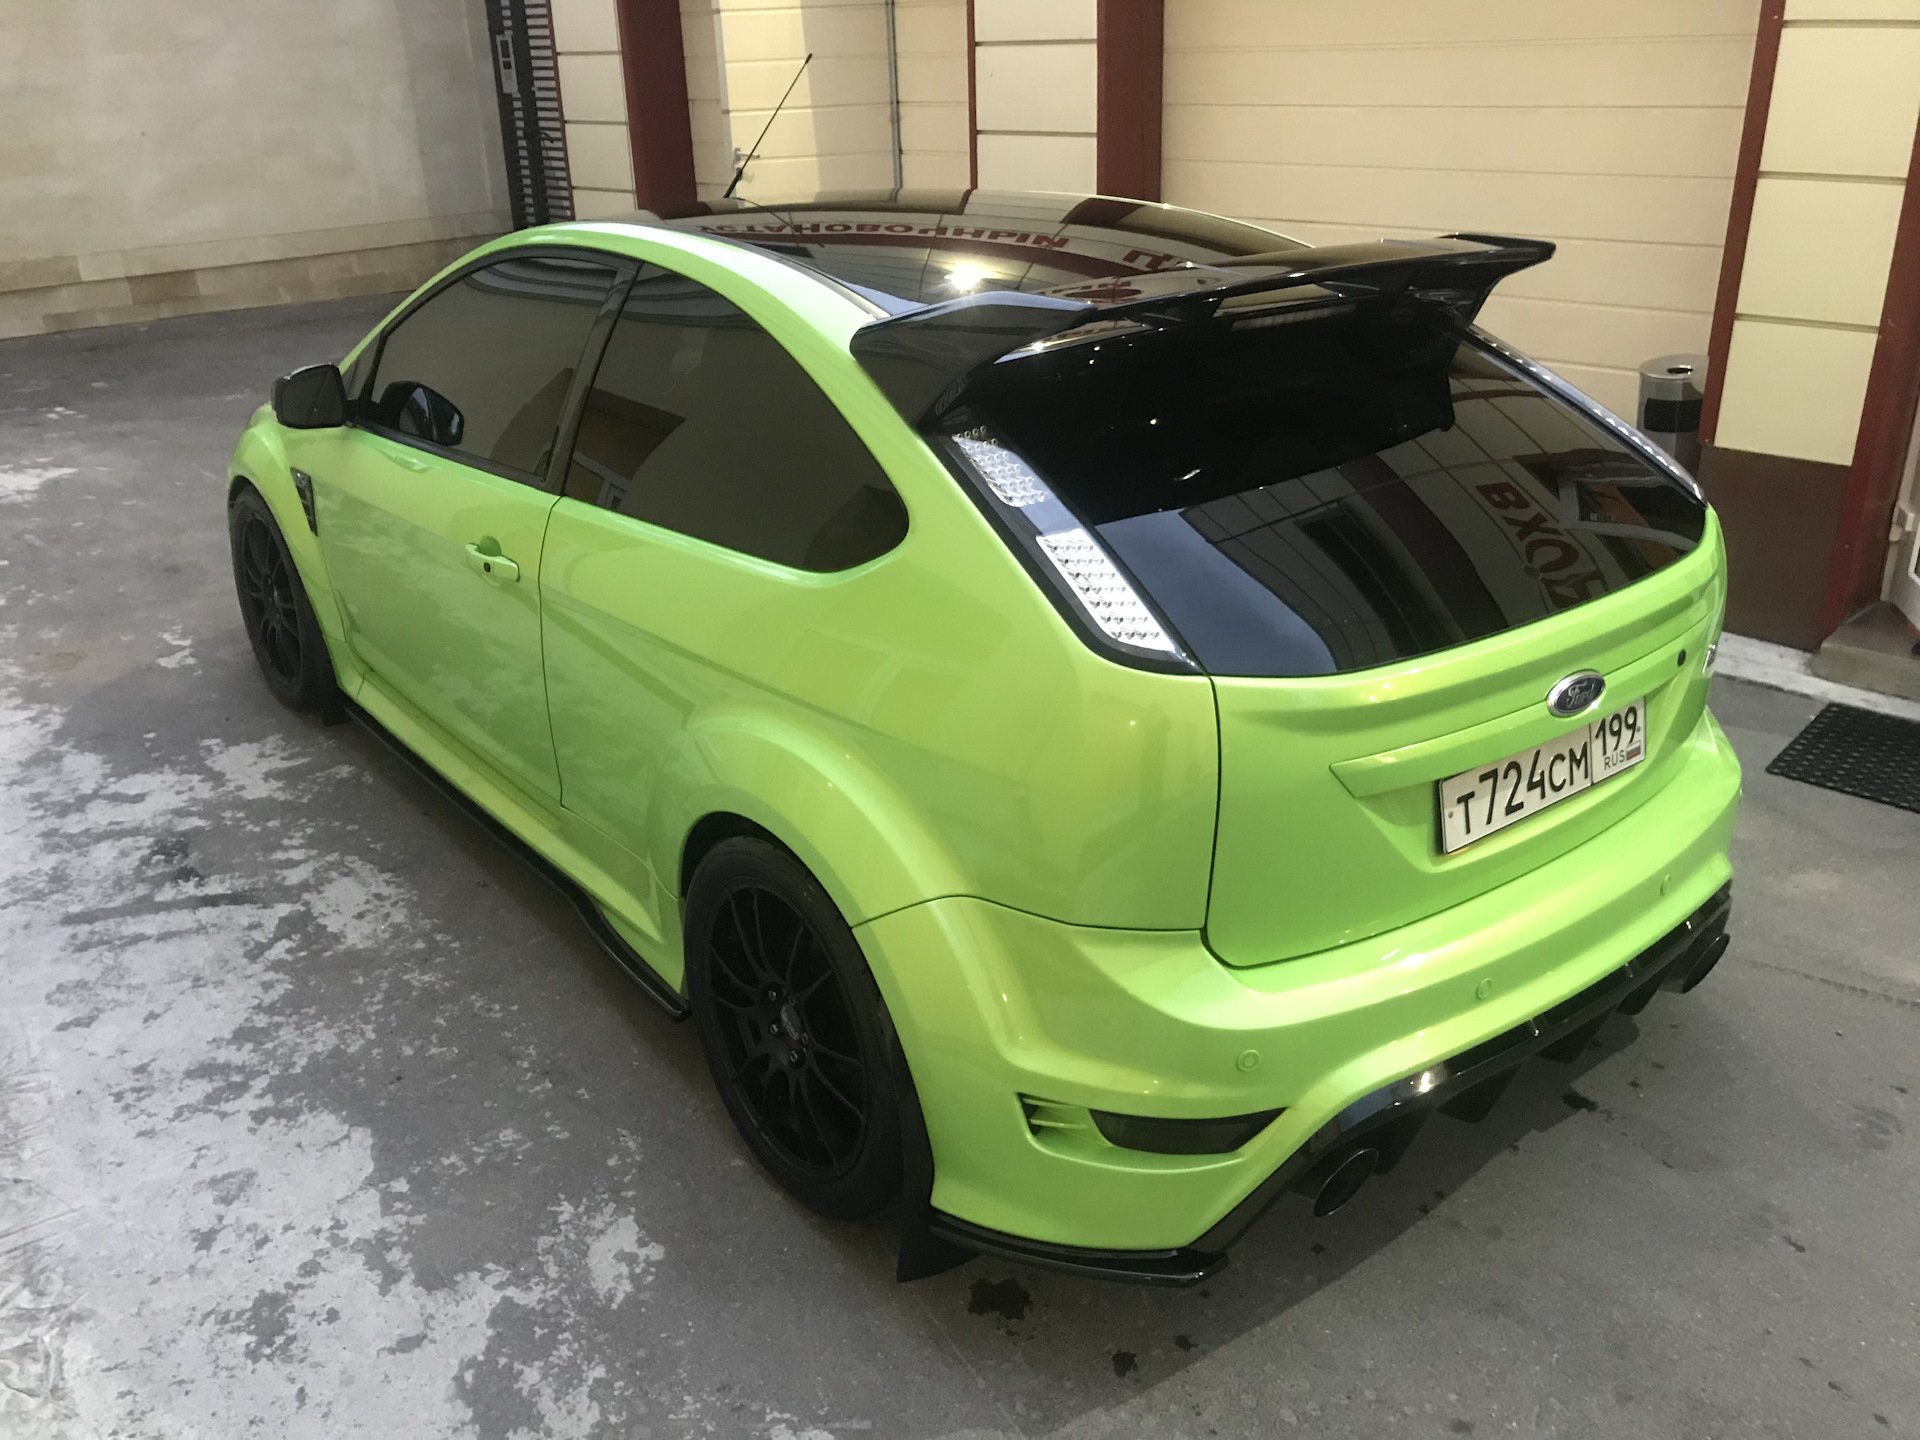 Tuning mode. Ford Focus 2 RS дорестайлинг. Ford Focus 2 RS Tuning. Ford Focus 2 Hatchback Tuning. Focus 2 RS бампер.